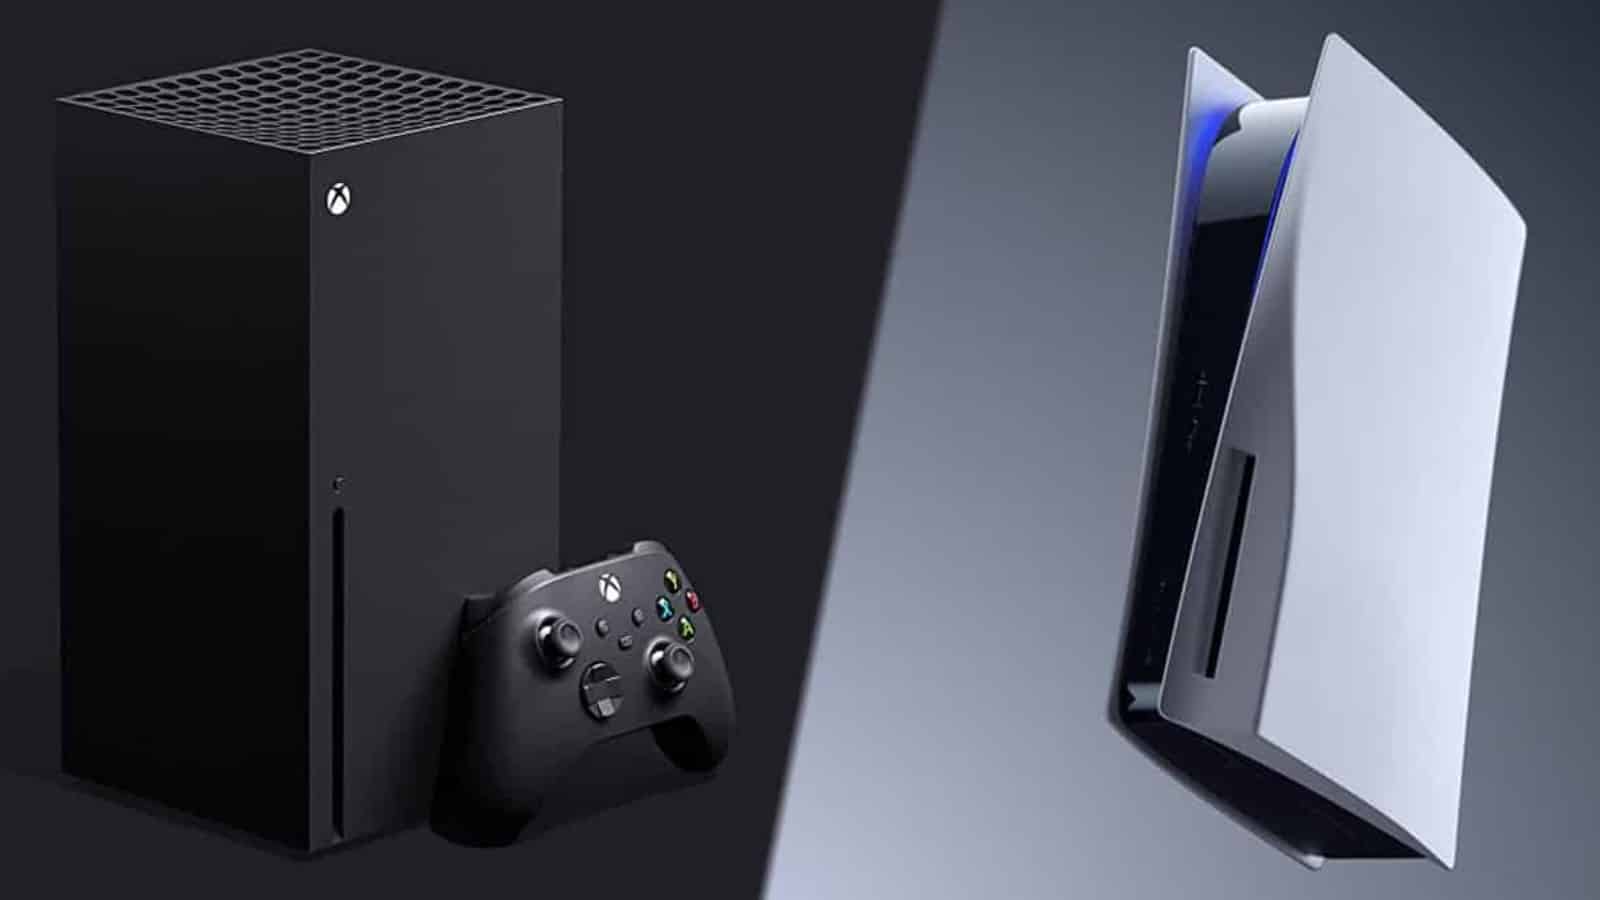 PS5 Pro and new Xbox Series X leak - Console upgrades launching